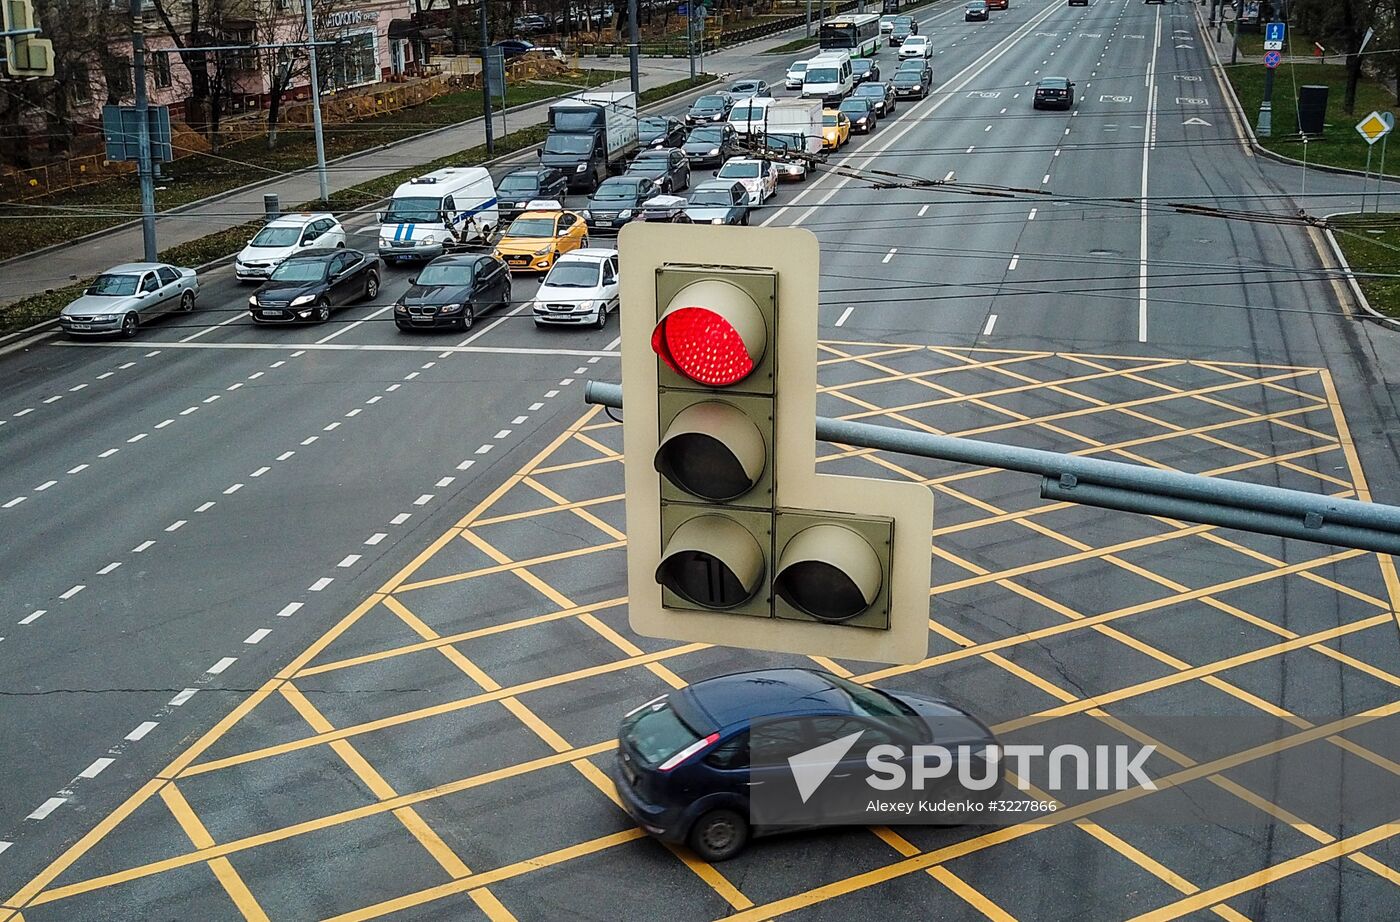 New yellow box markings at intersections in Moscow